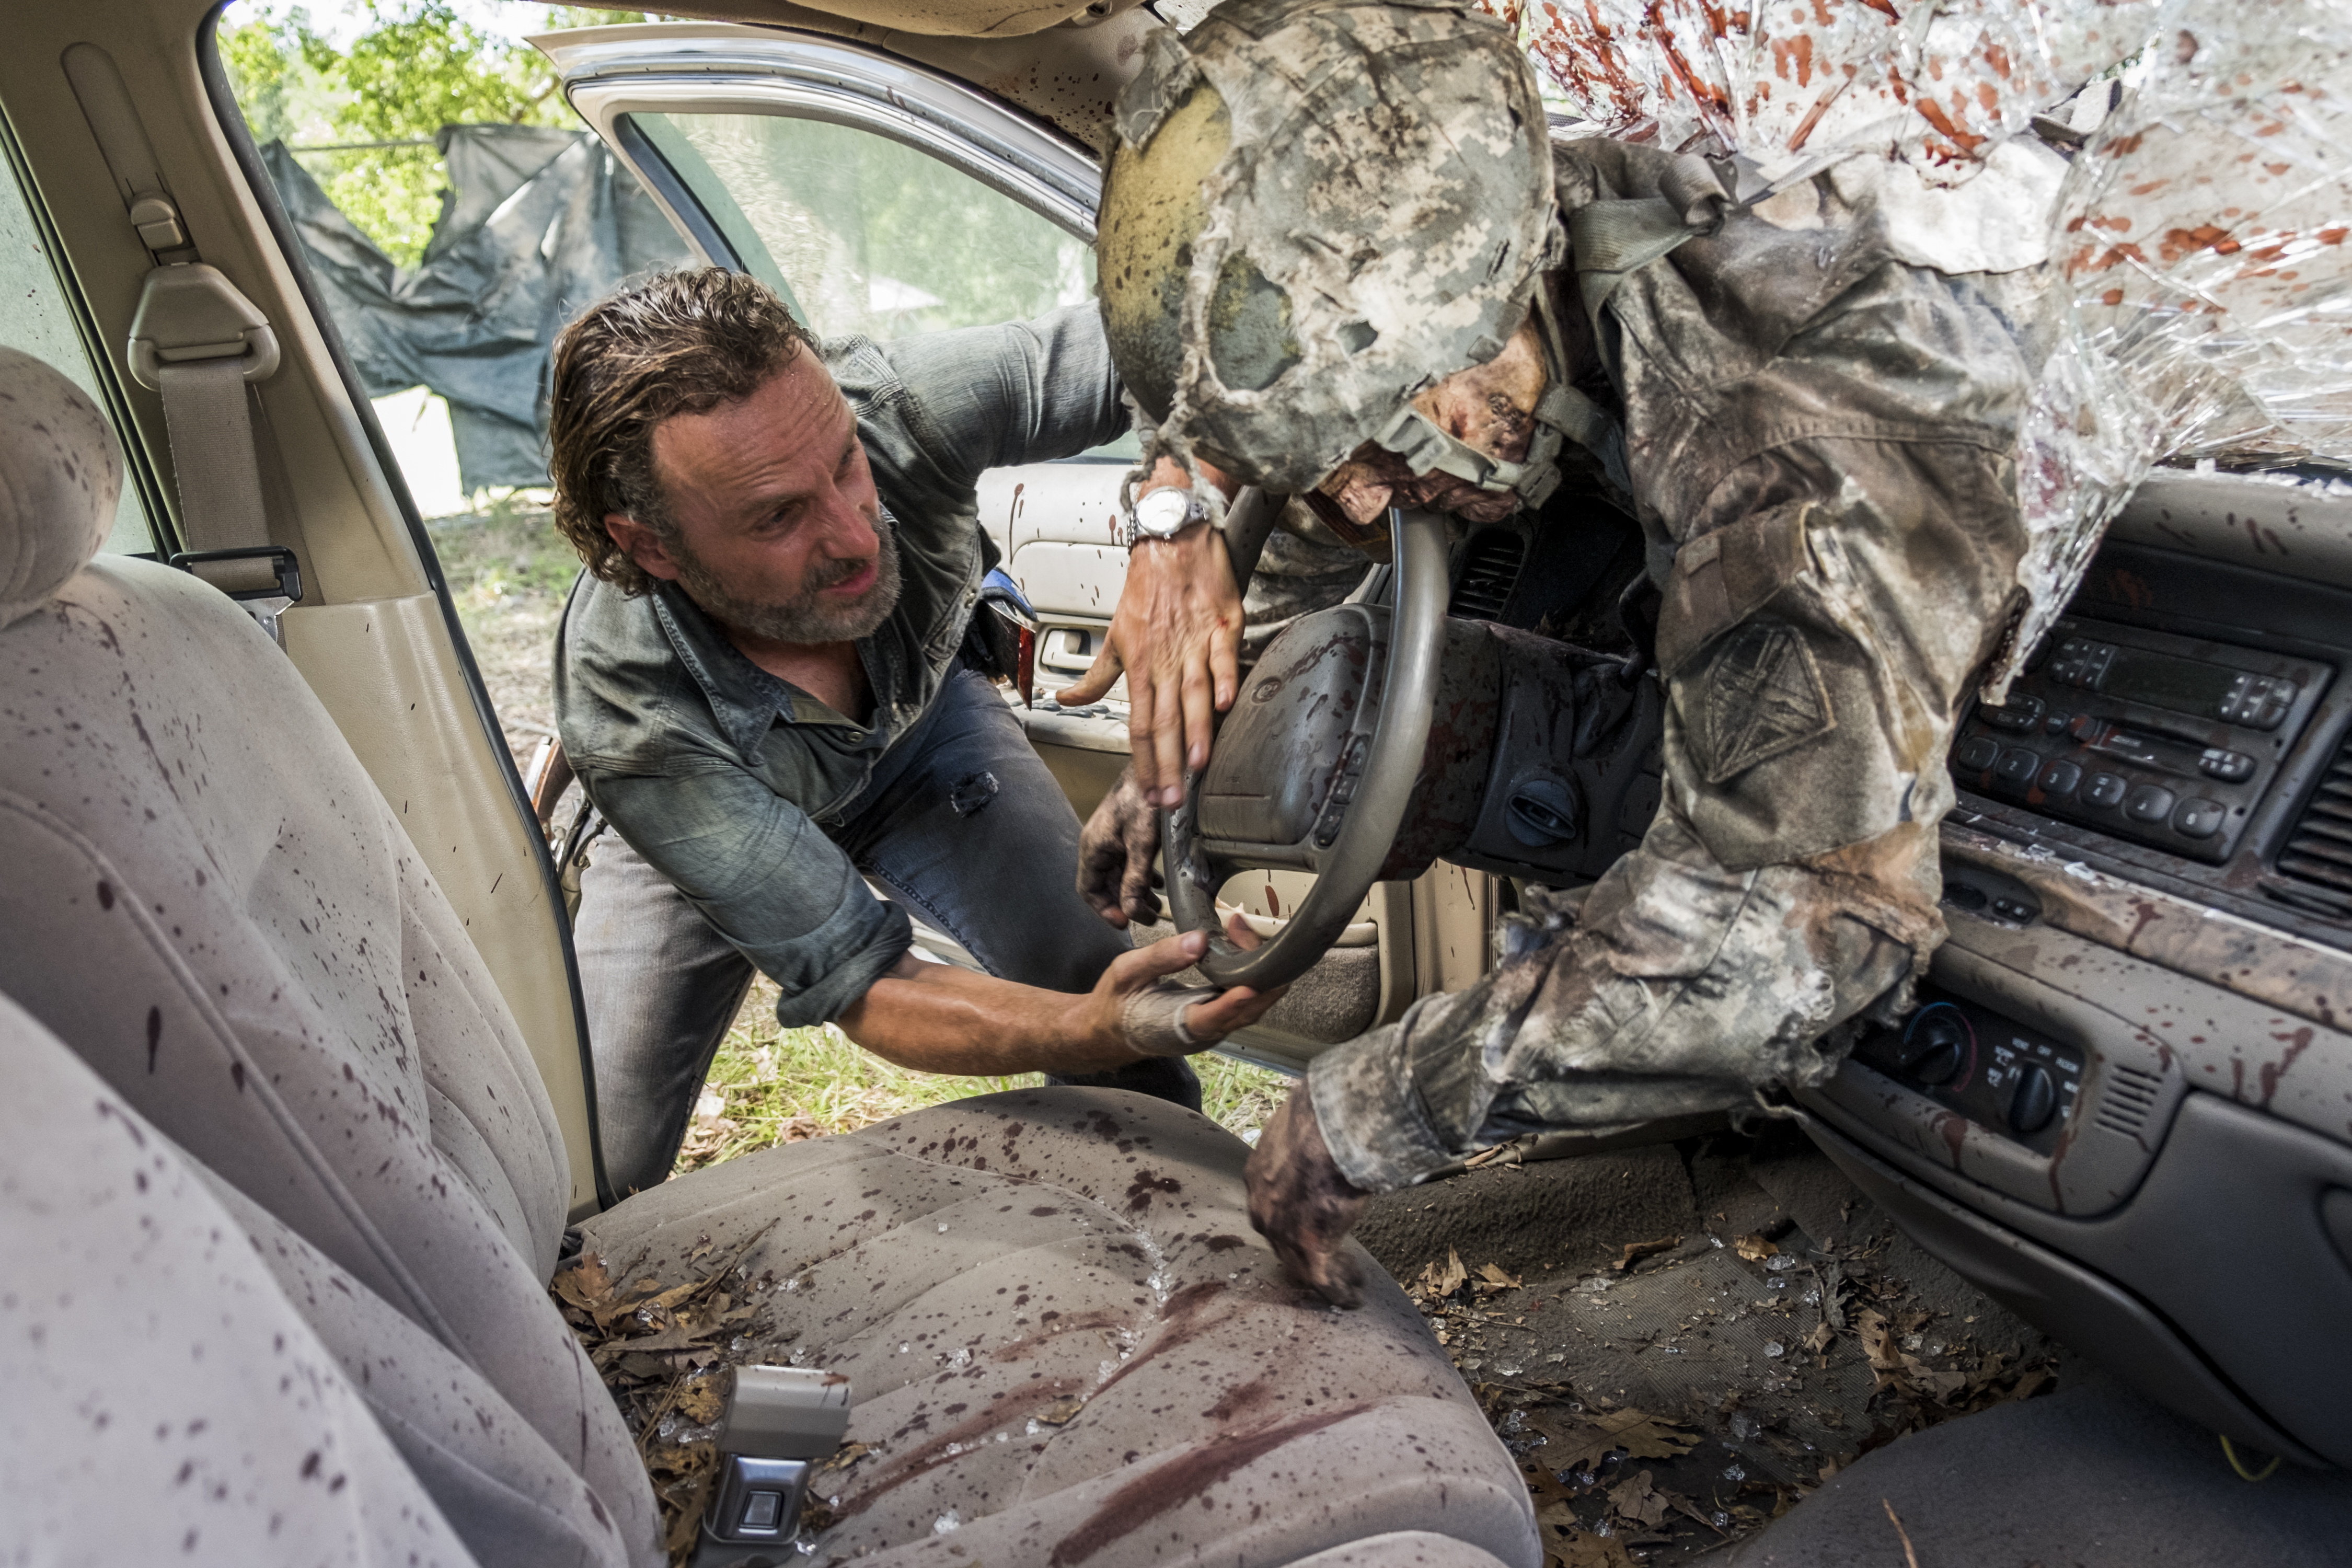 Andrew Lincoln as Rick Grimes, Walker - The Walking Dead _ Season 7, Episode 12 - Photo Credit: Gene Page/AMC